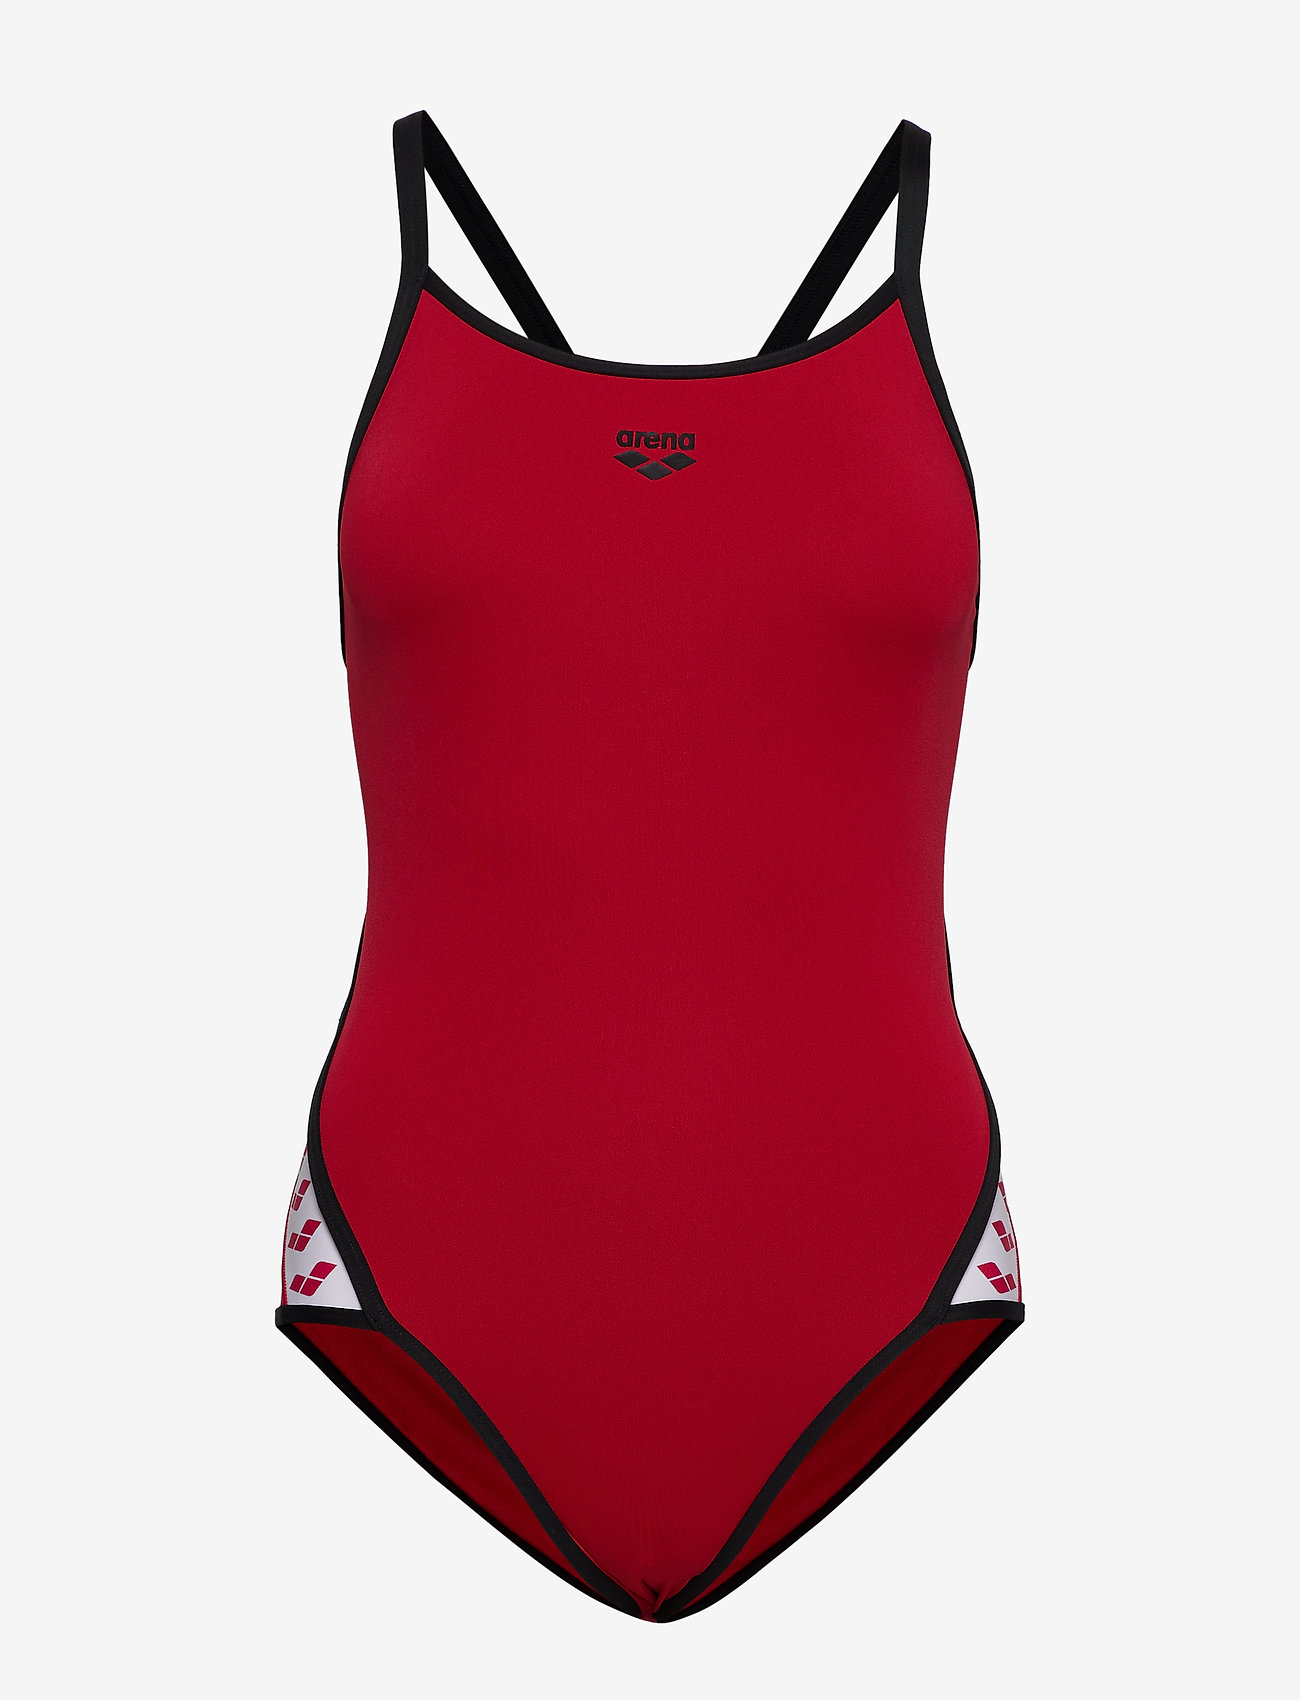 Arena - W TEAM STRIPE SUPER FLY BACK ONE PIECE BLACK-WHITE - swimsuits - red-black - 0